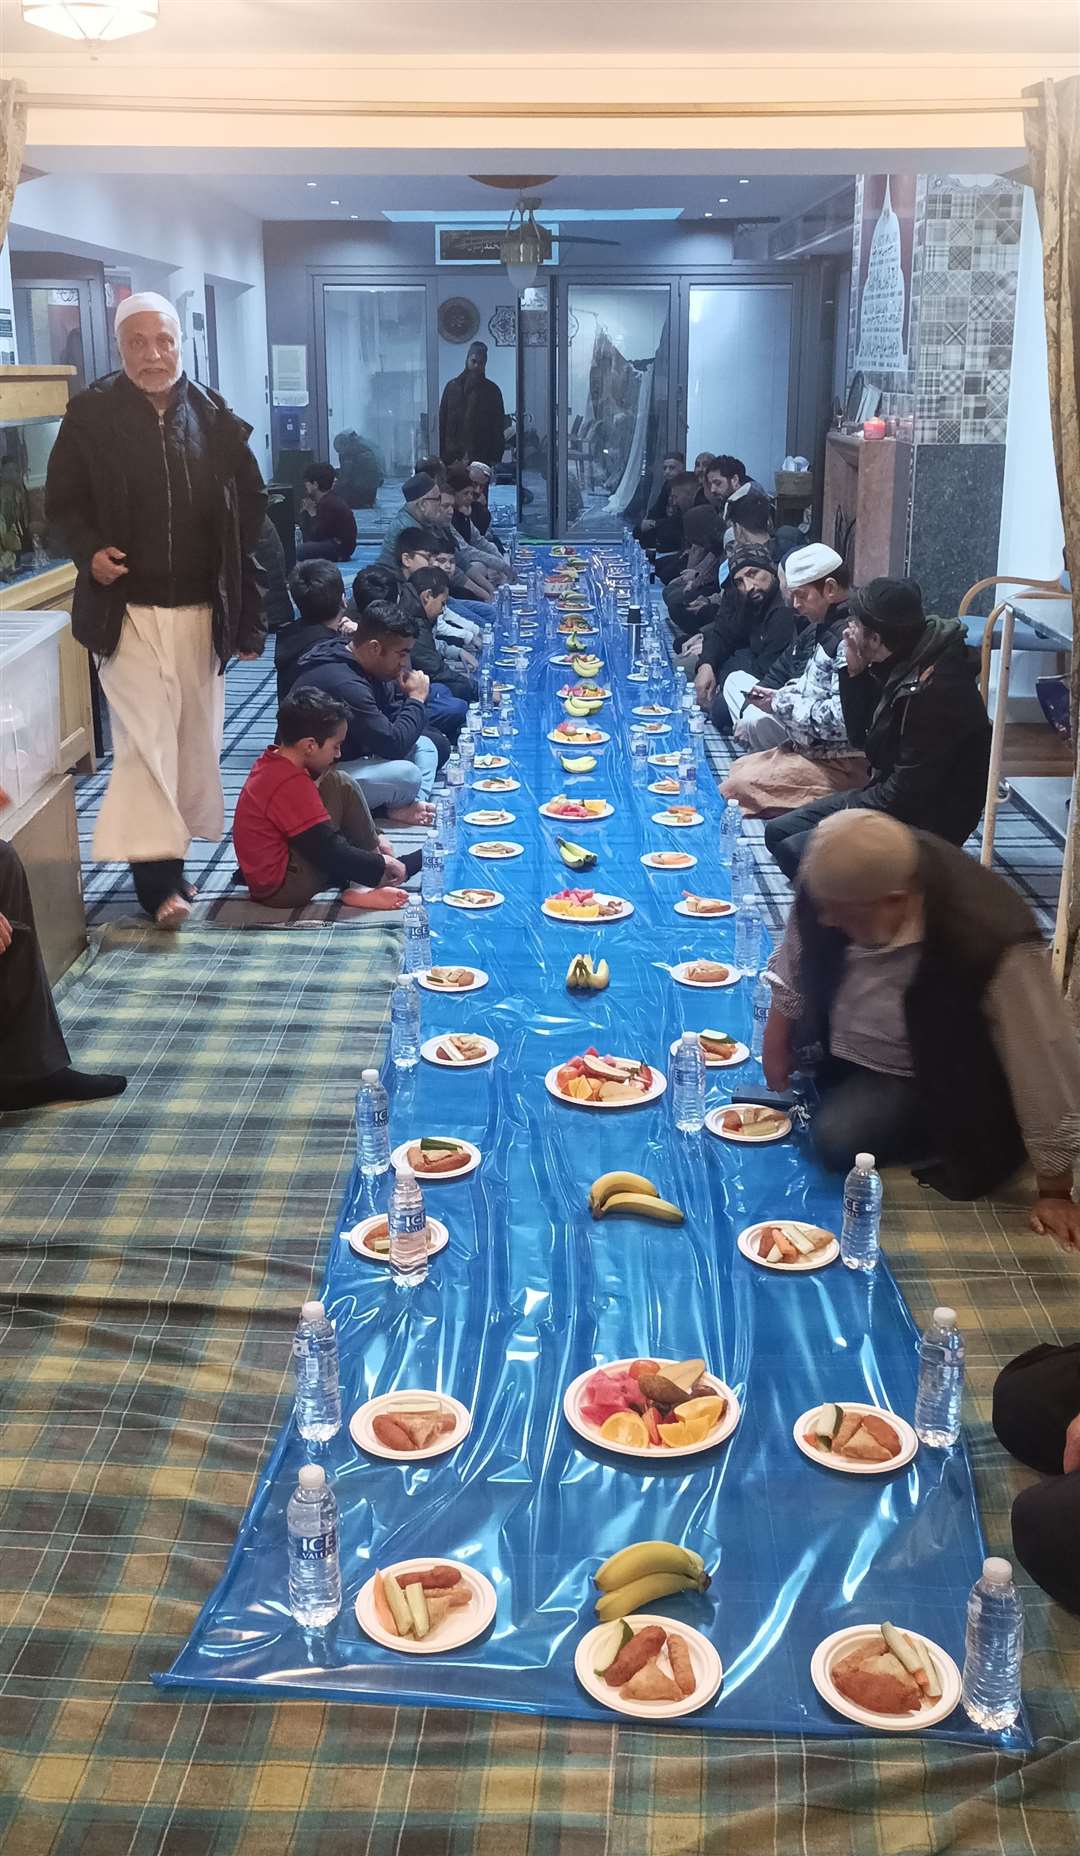 The community breaks their fast together in what is known as iftar.